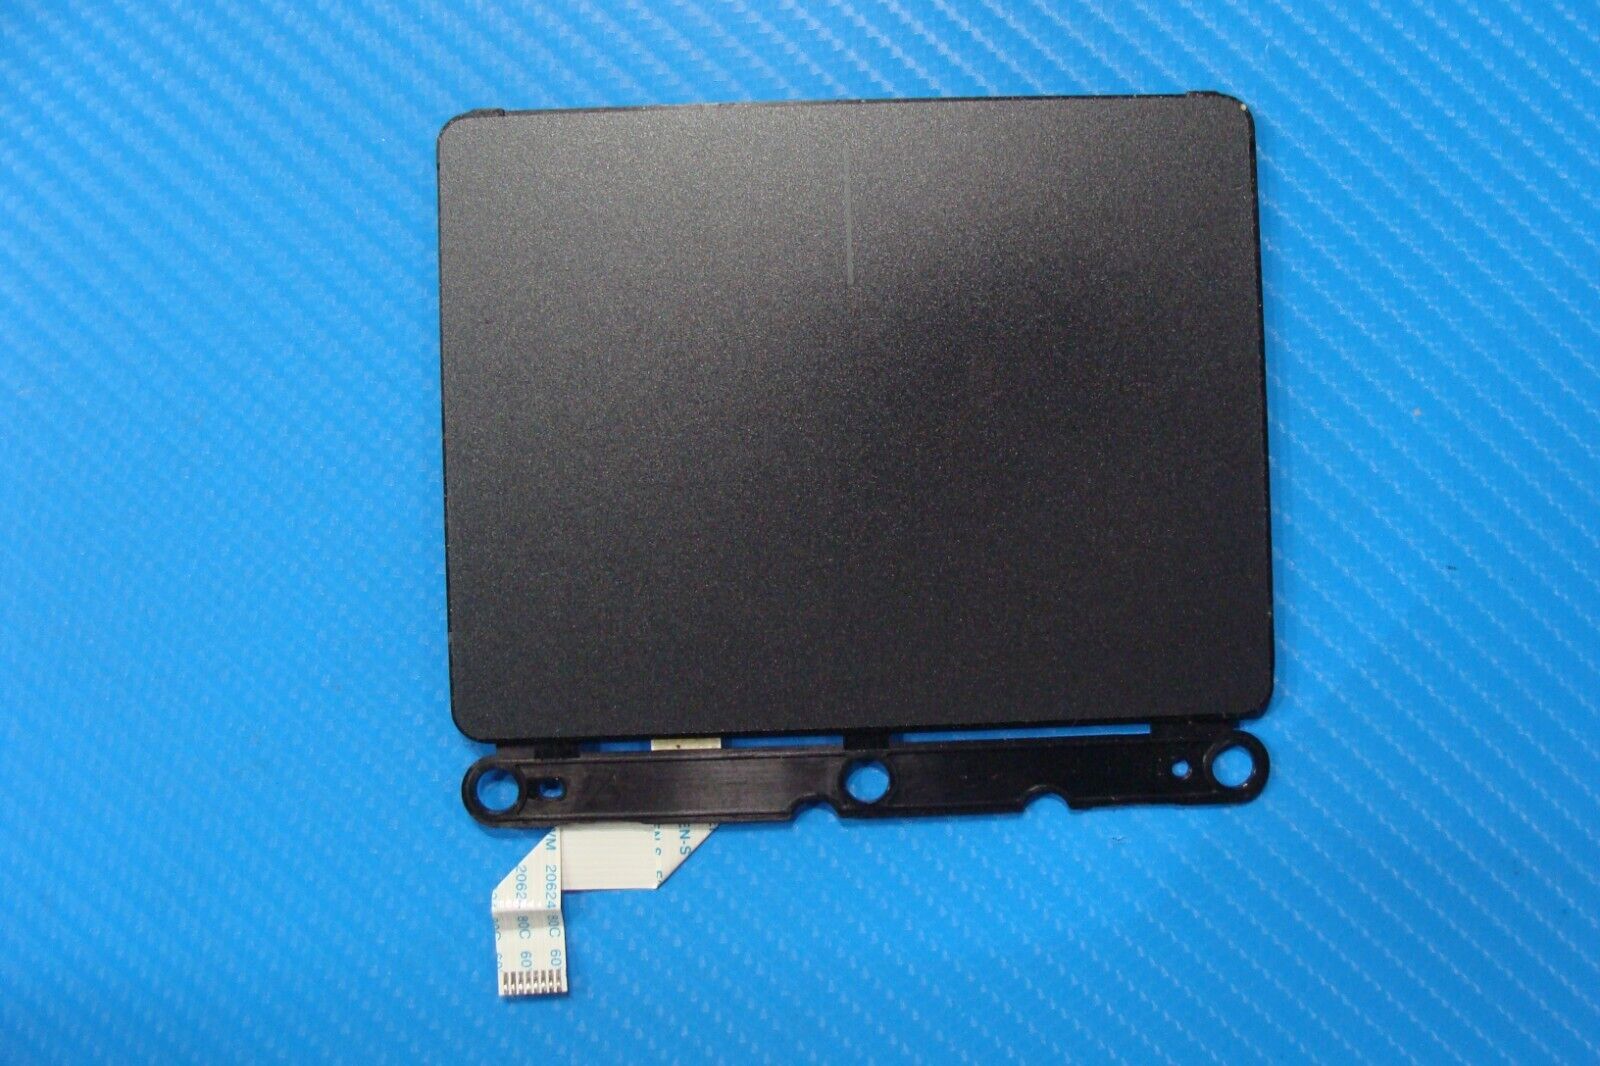 Dell Inspiron 15.6” 15 7547 Genuine Laptop TouchPad Board w/Cable TM-P3014-001